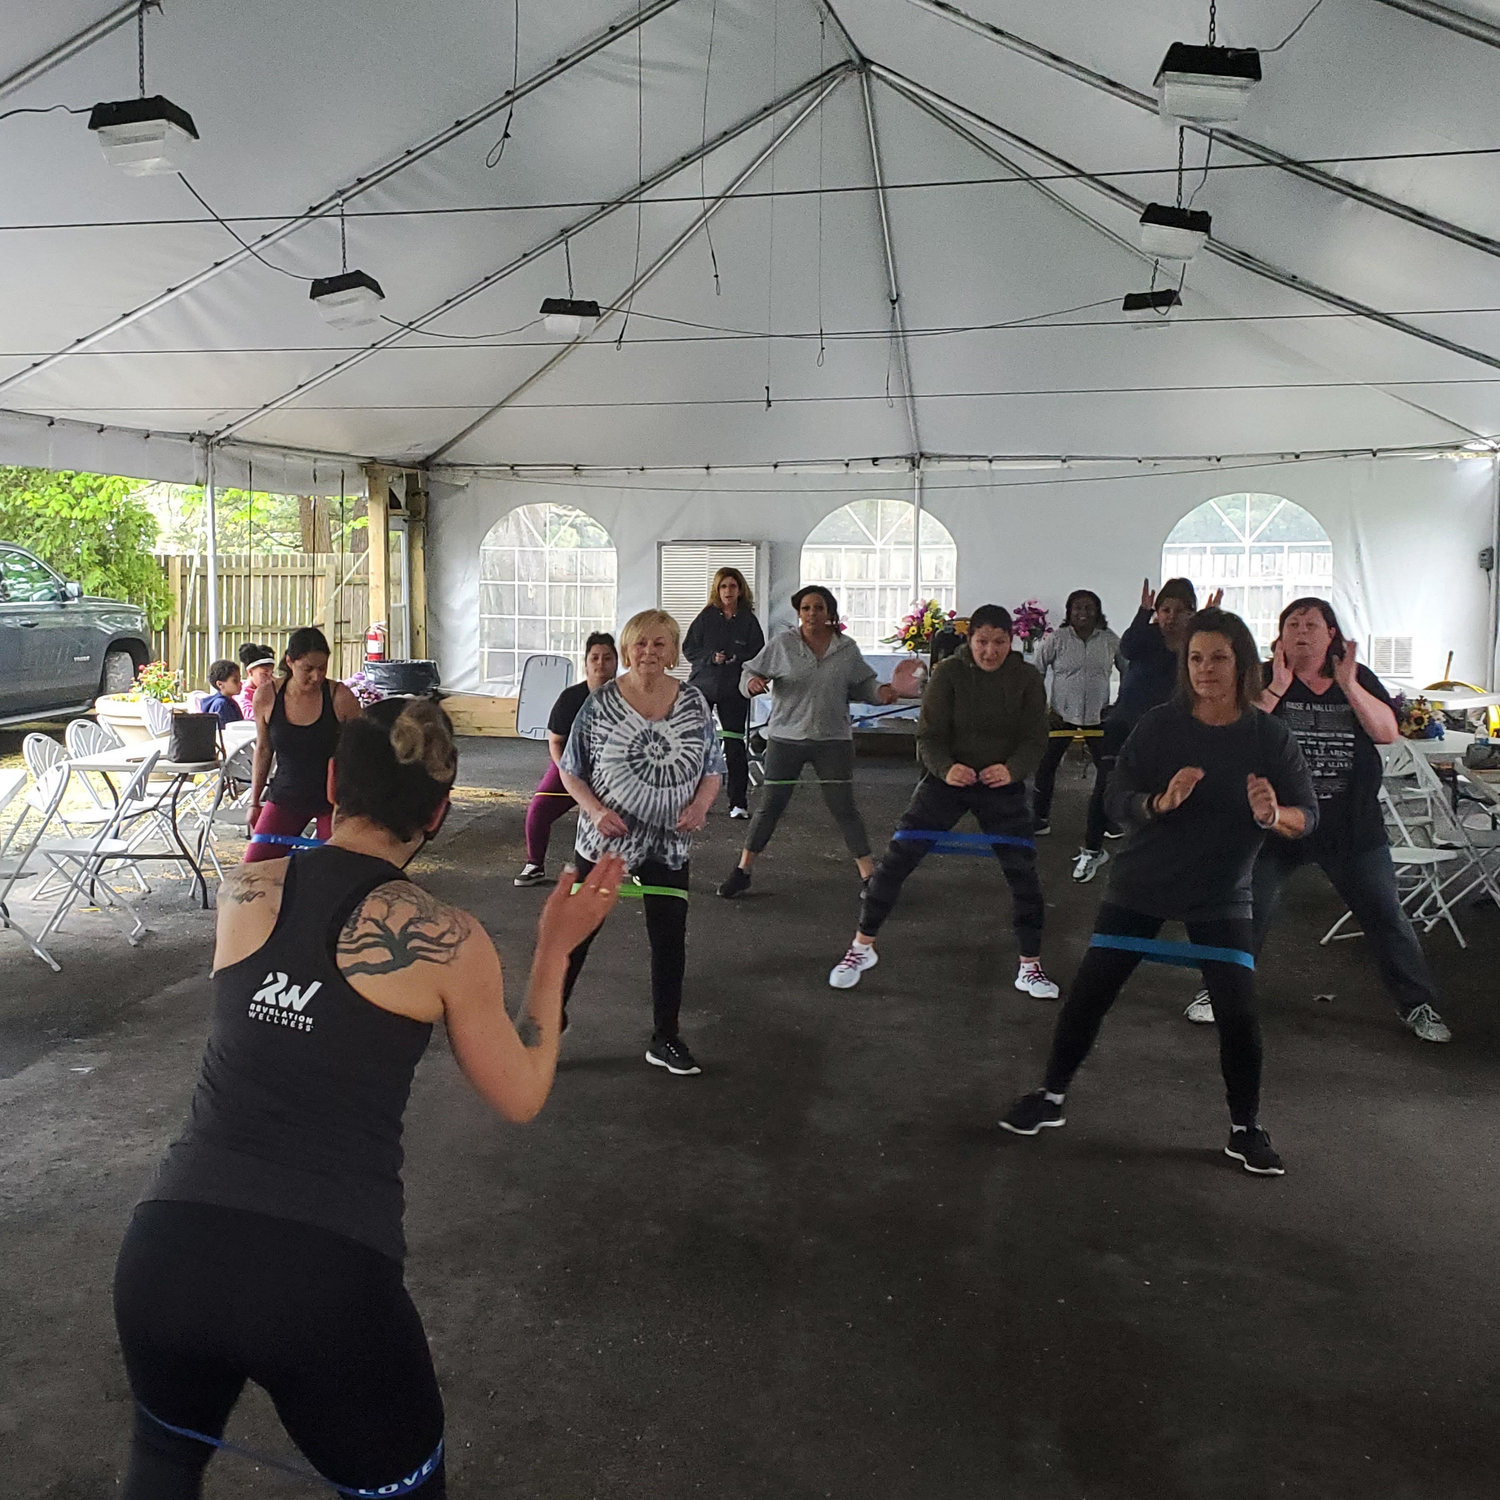 The Made Well fitness class takes place in a tent in back of South Bay Bible Church in East Moriches.